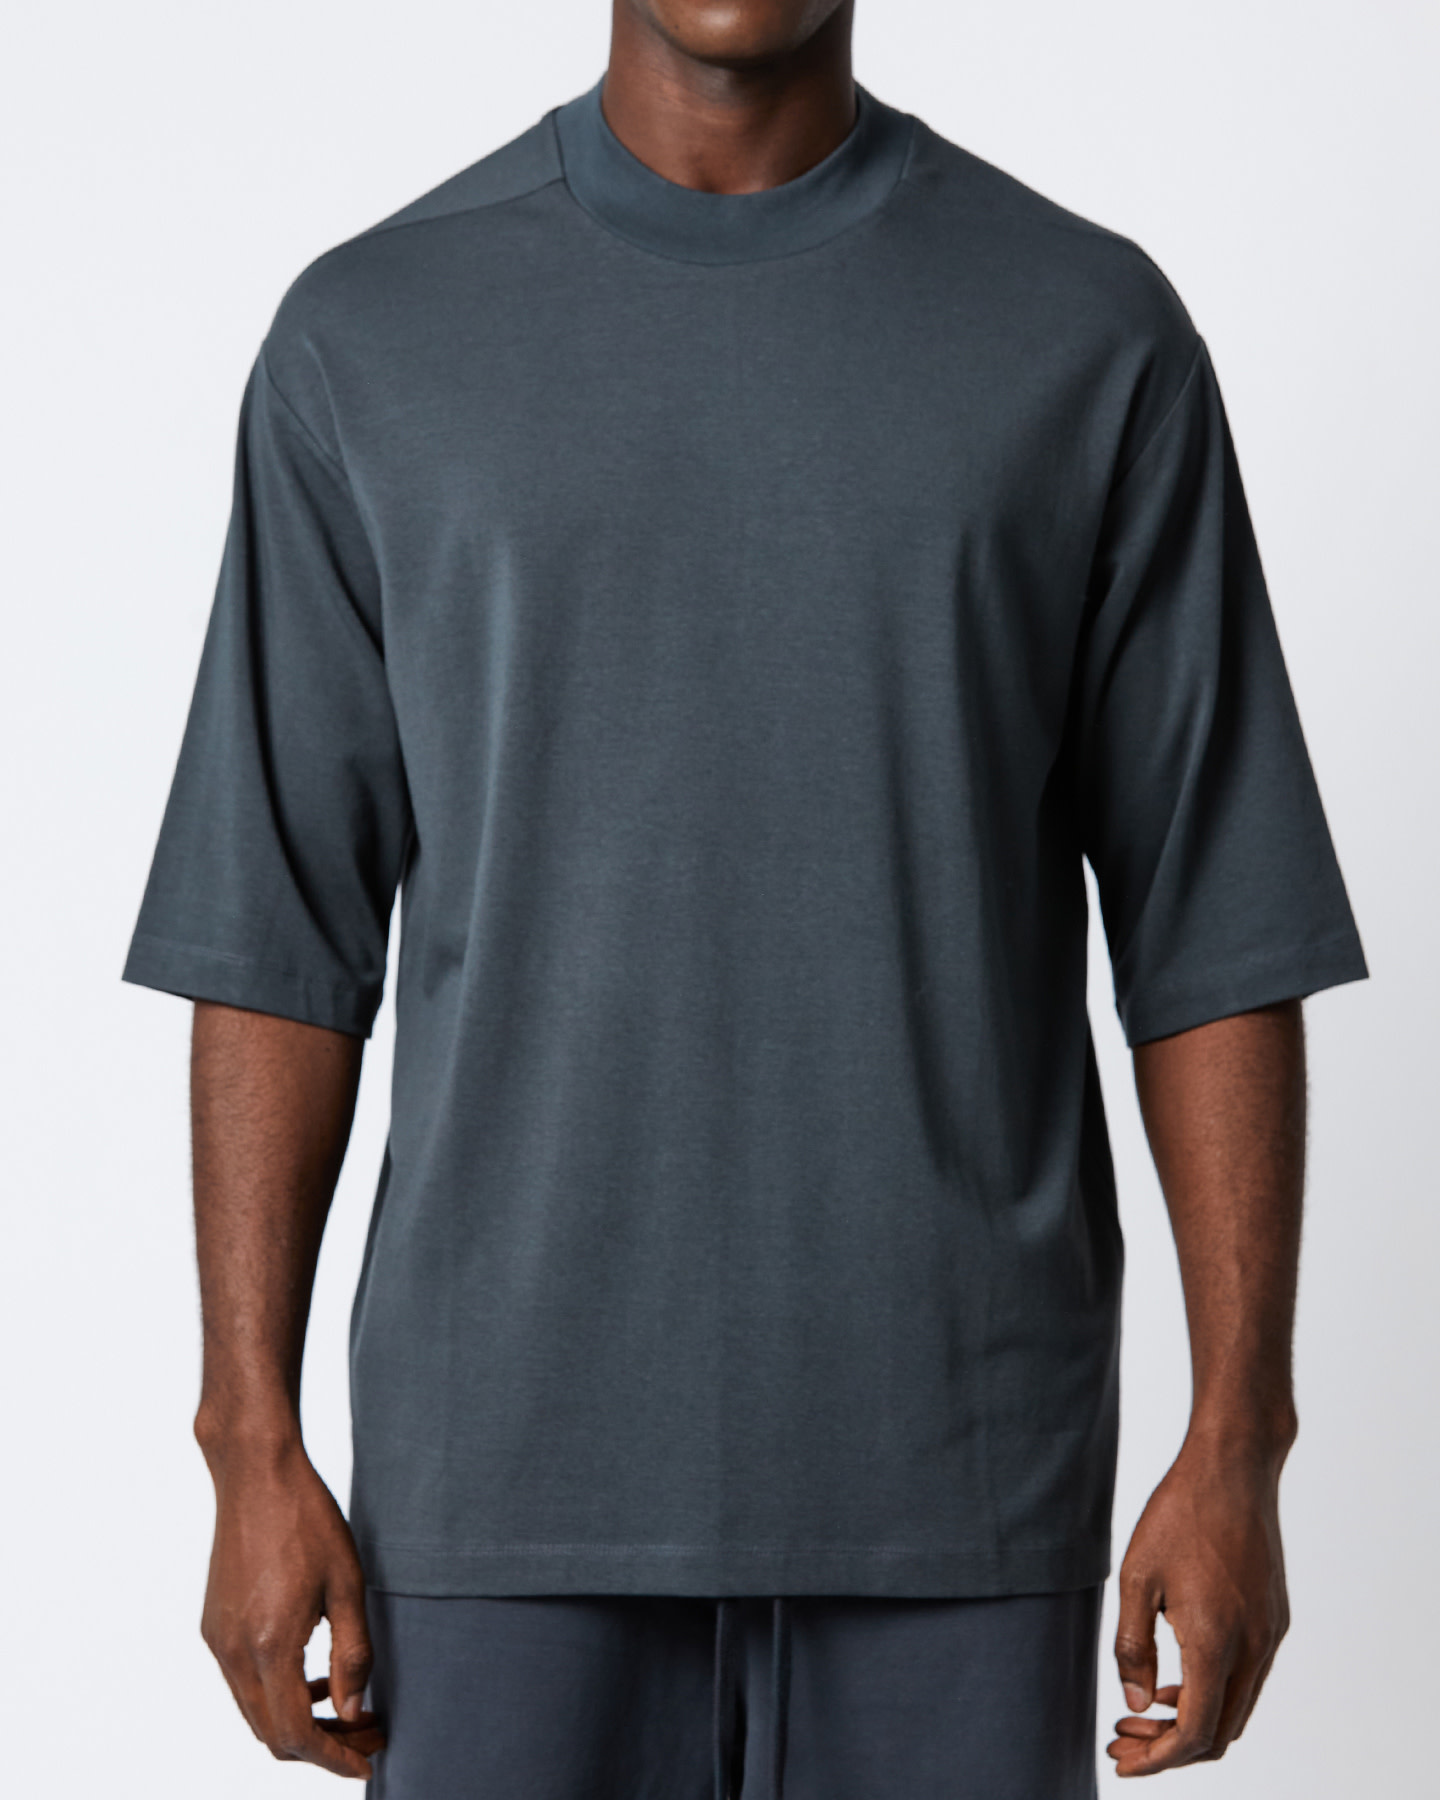 COTTON & MODAL 3/4 RELAXED TEE - FOREST